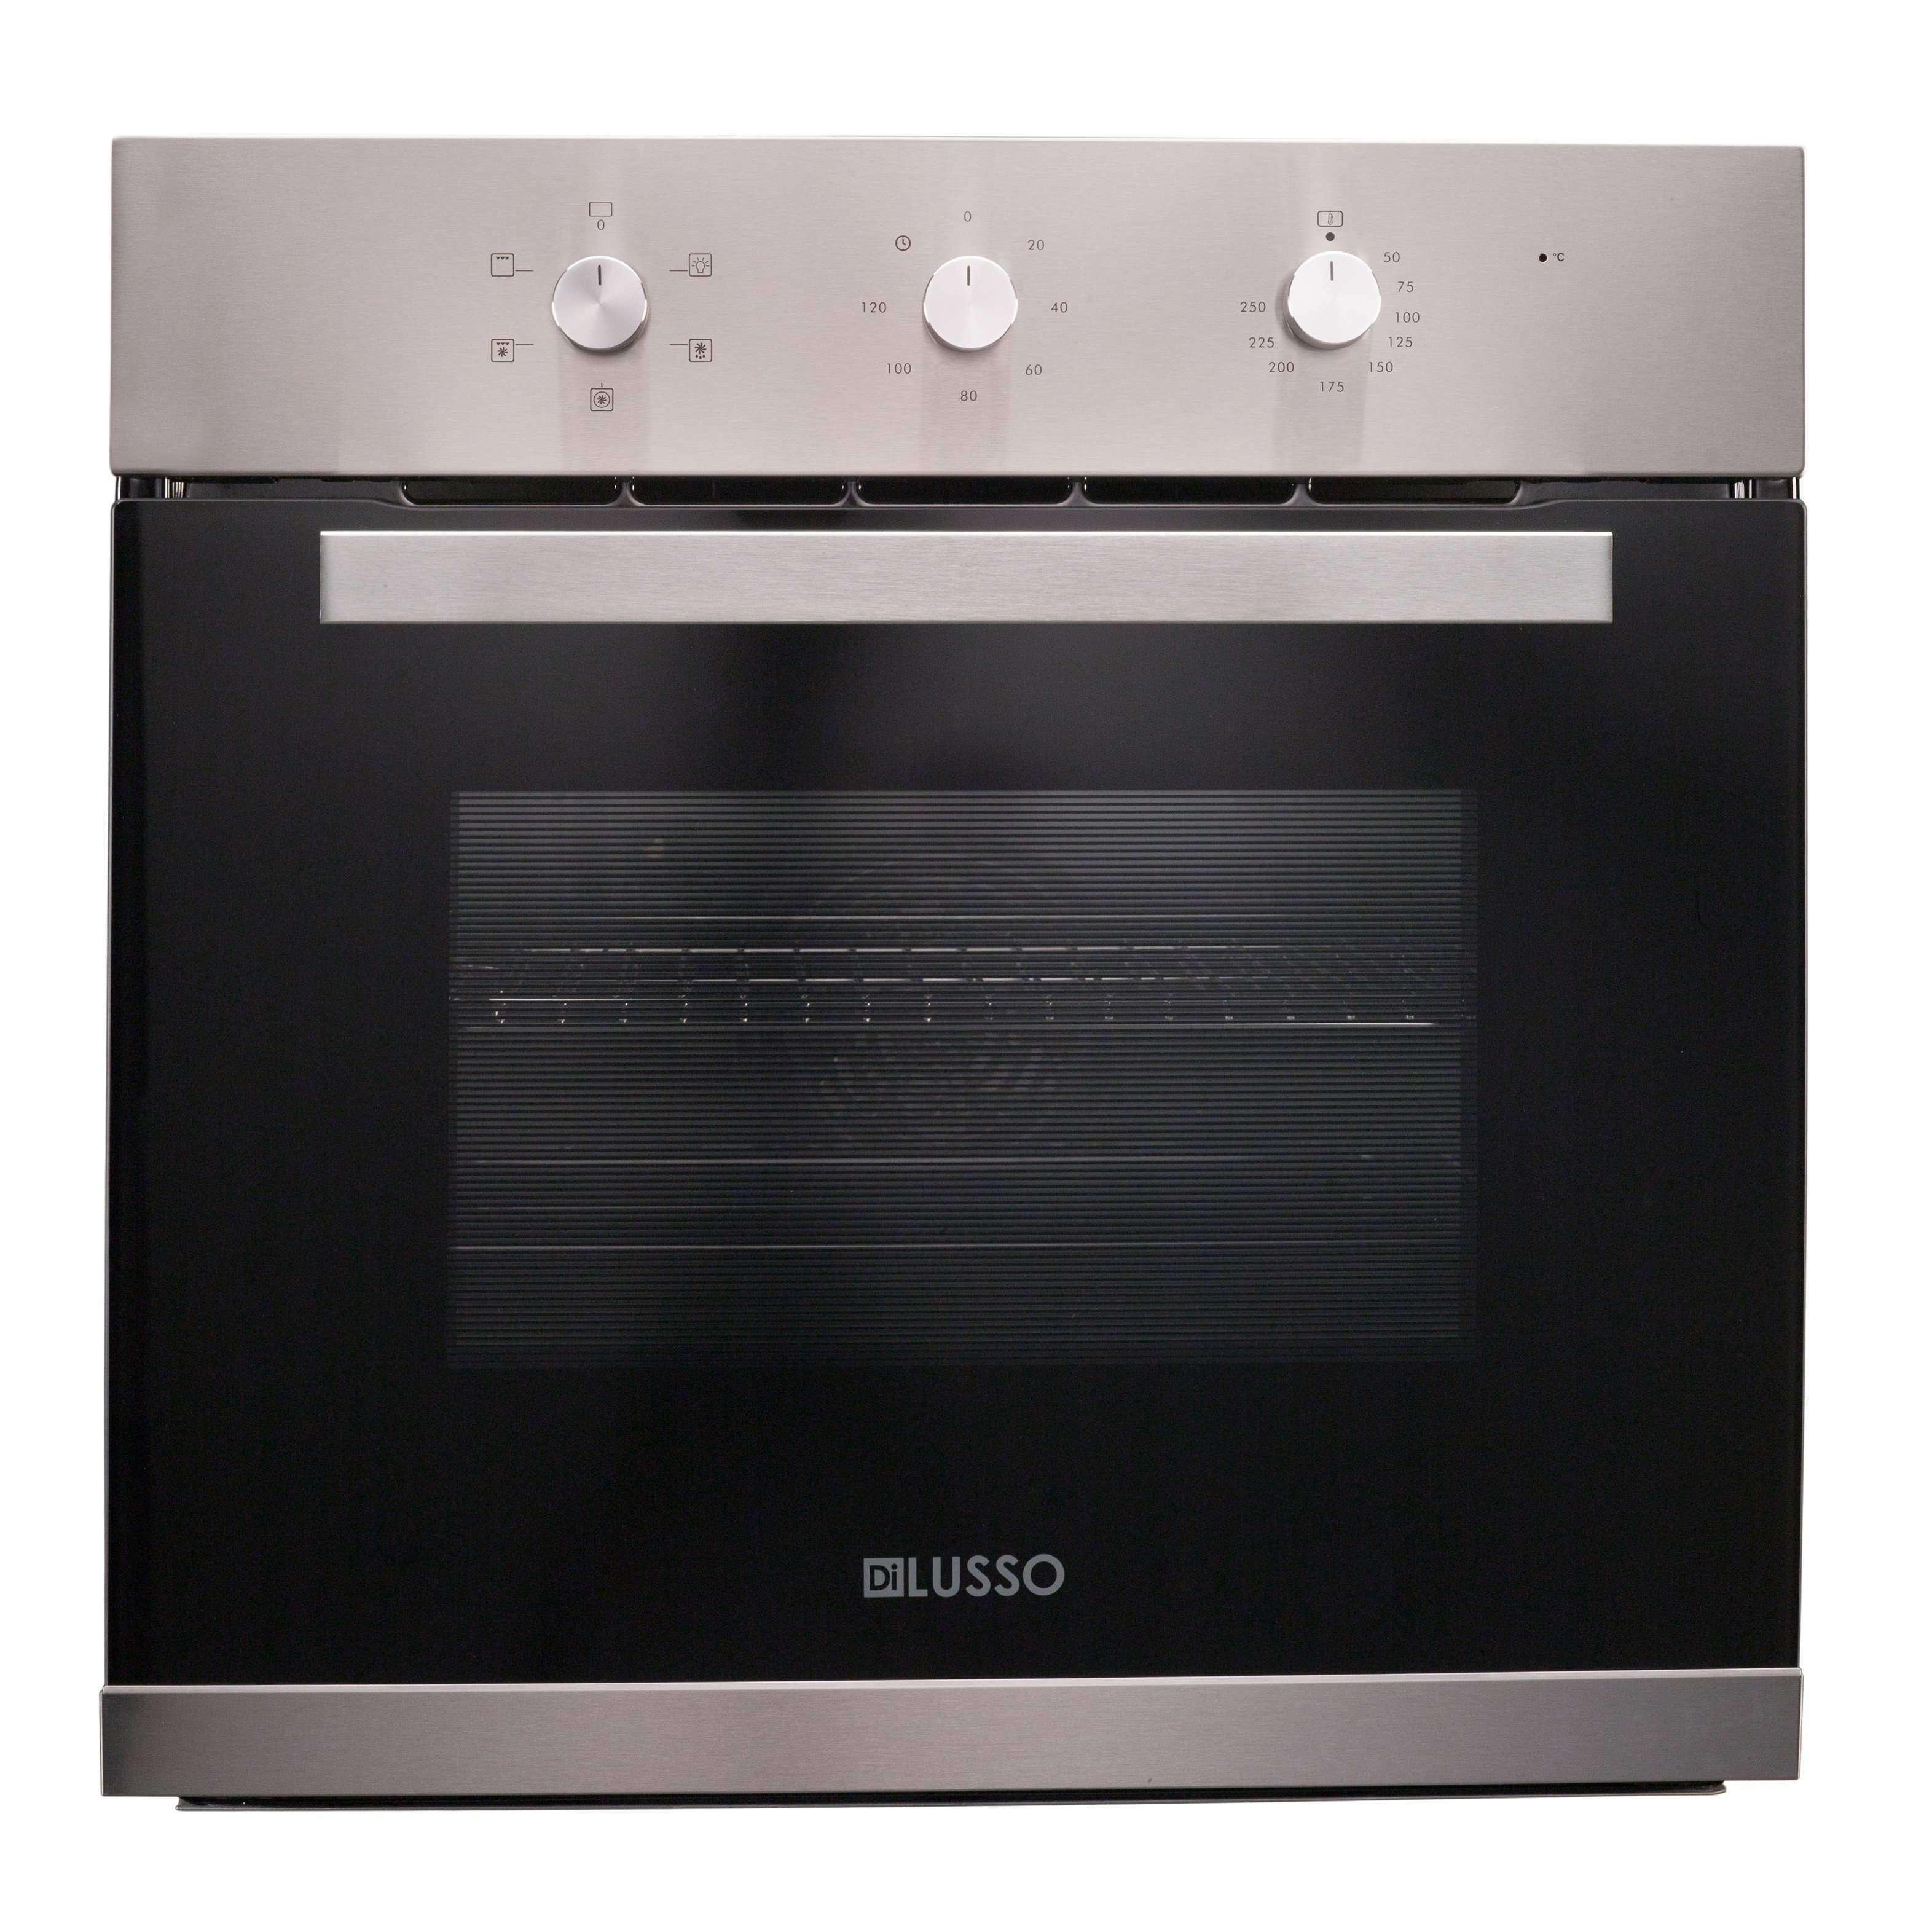 Di Lusso 60Cm Ov604Ms 4 Function Electric Oven Stainless Steel - Burdens Plumbing